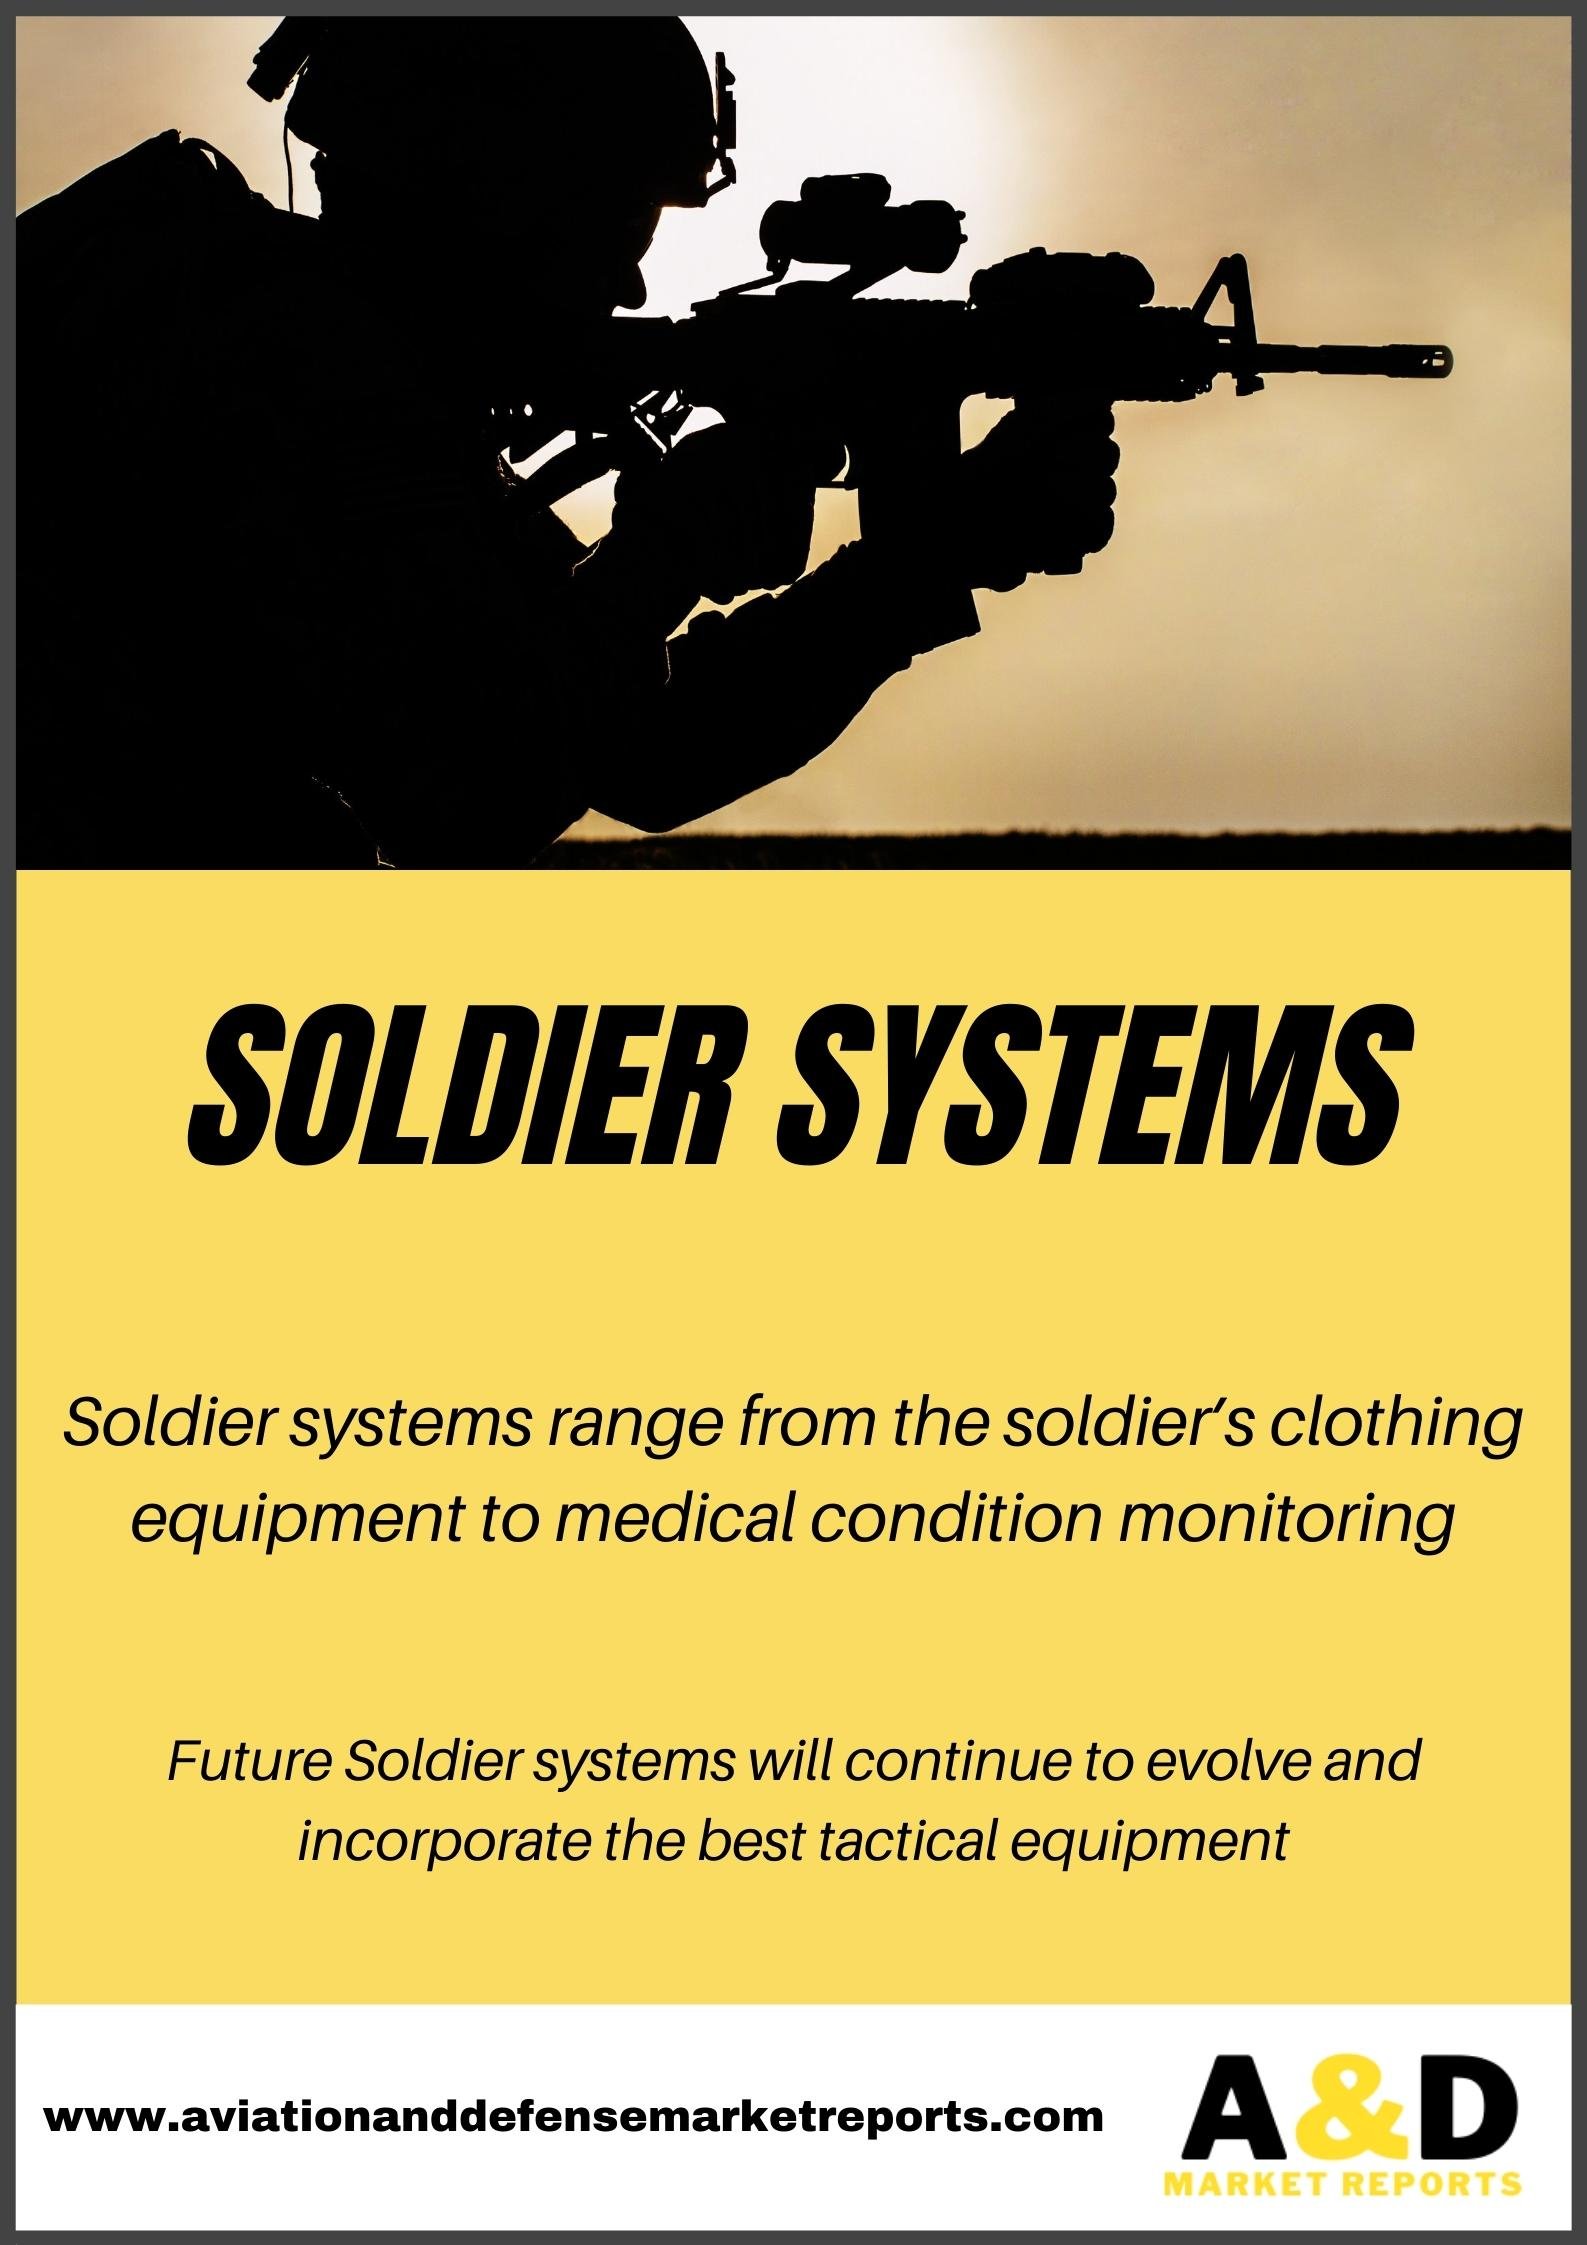 Meet the Future Soldiers Systems